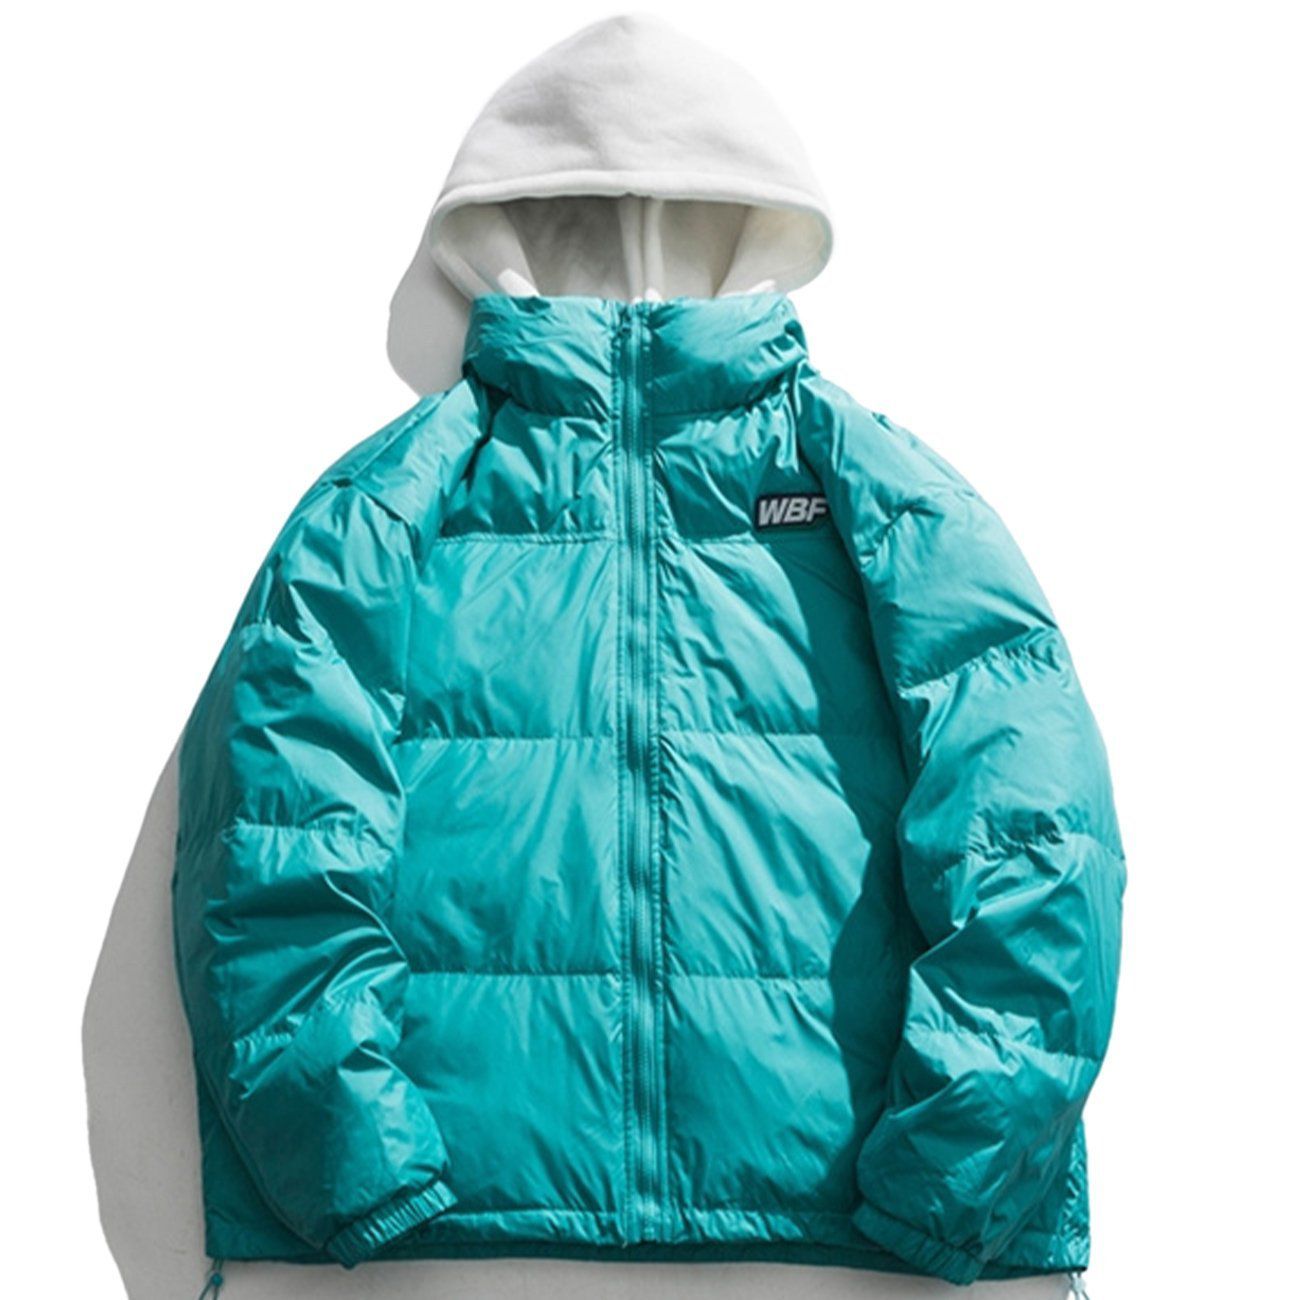 puffer jacket  North face puffer jacket, North face jacket outfit